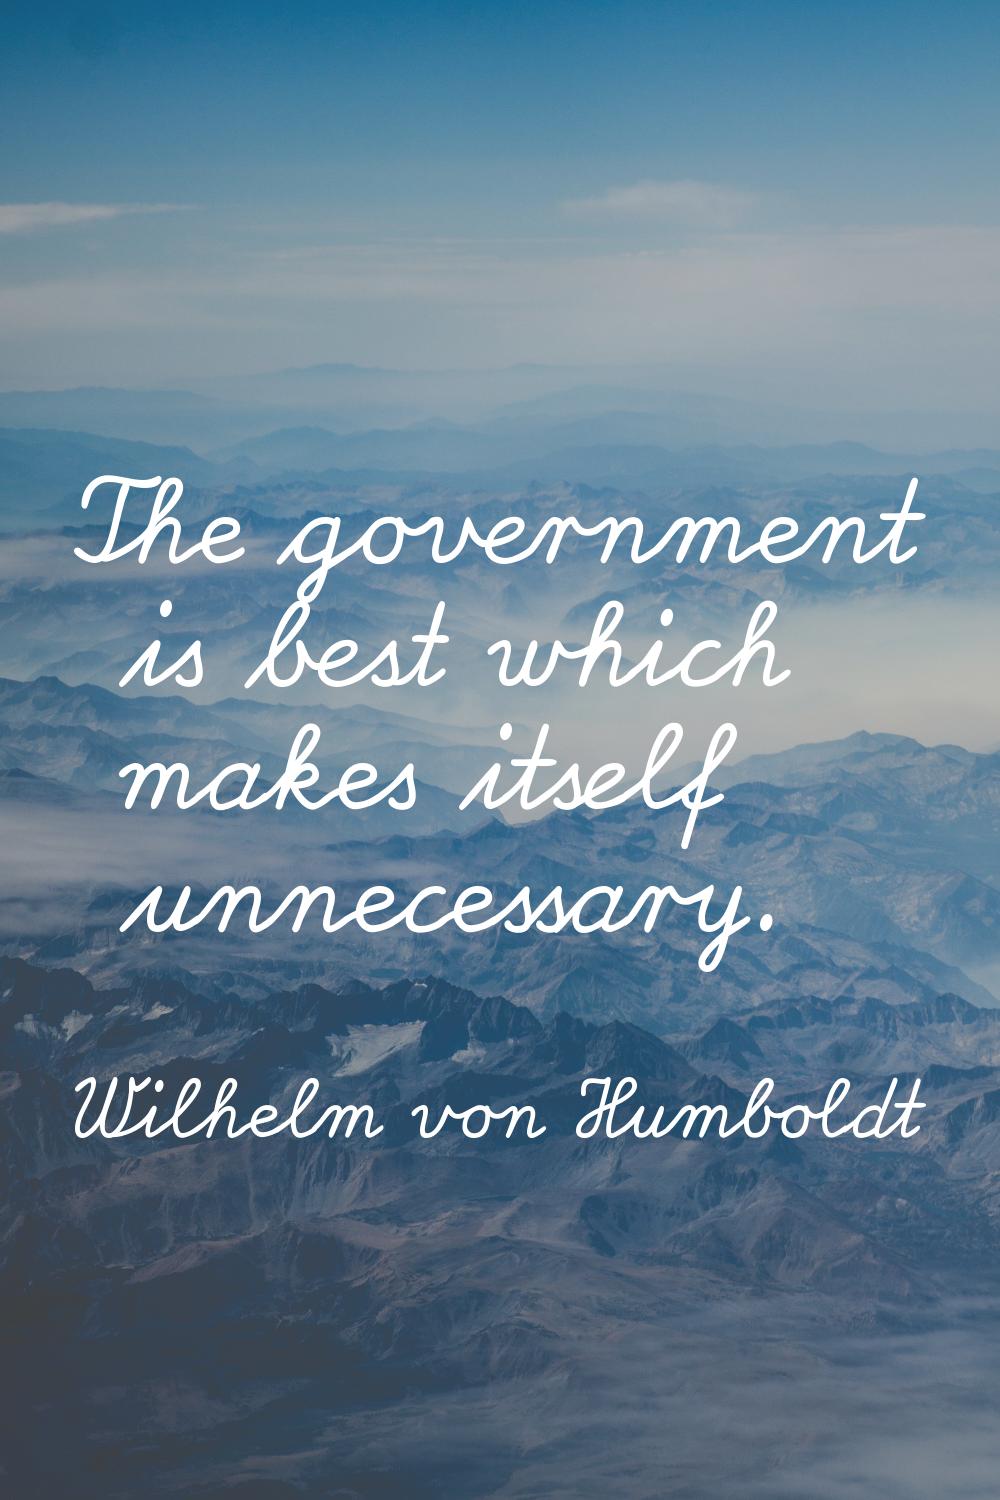 The government is best which makes itself unnecessary.